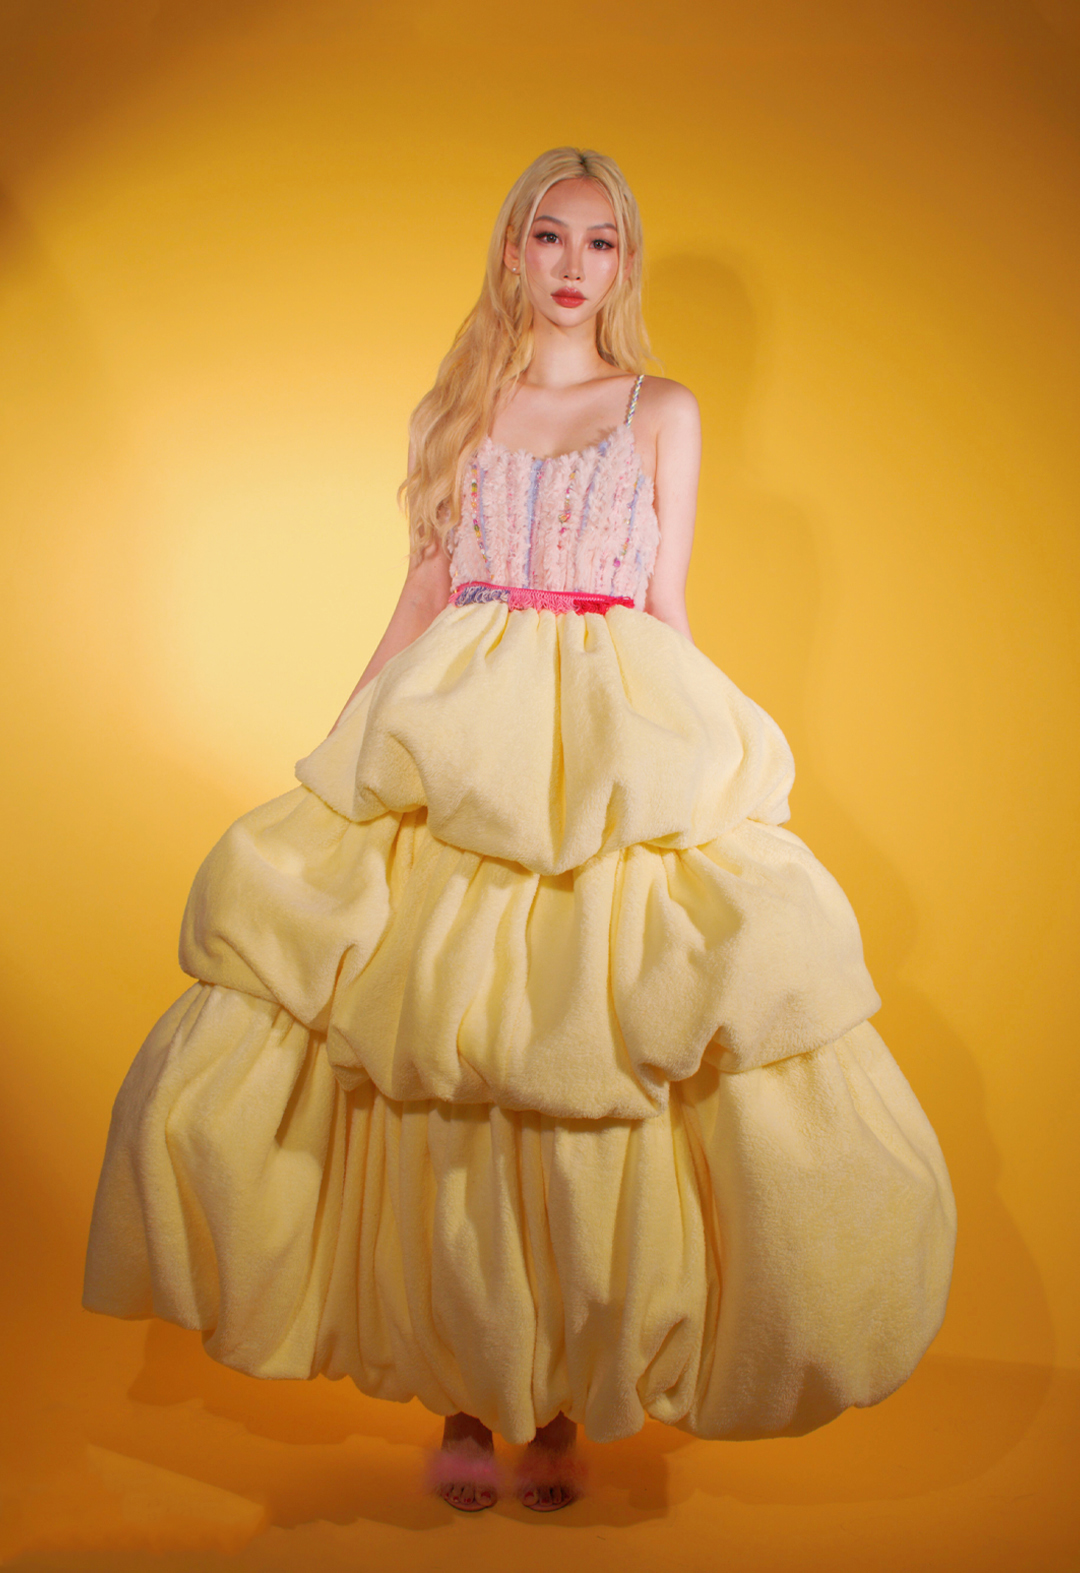 Photo of a girl with blonde hair standing facing to the camera. She has both of her hands holding the skirt of the dress. The dress she is wearing is a pastel pink-and-yellow furry dress. It has a bright-pink knit tassel belt. The background of this photo is yellow. 